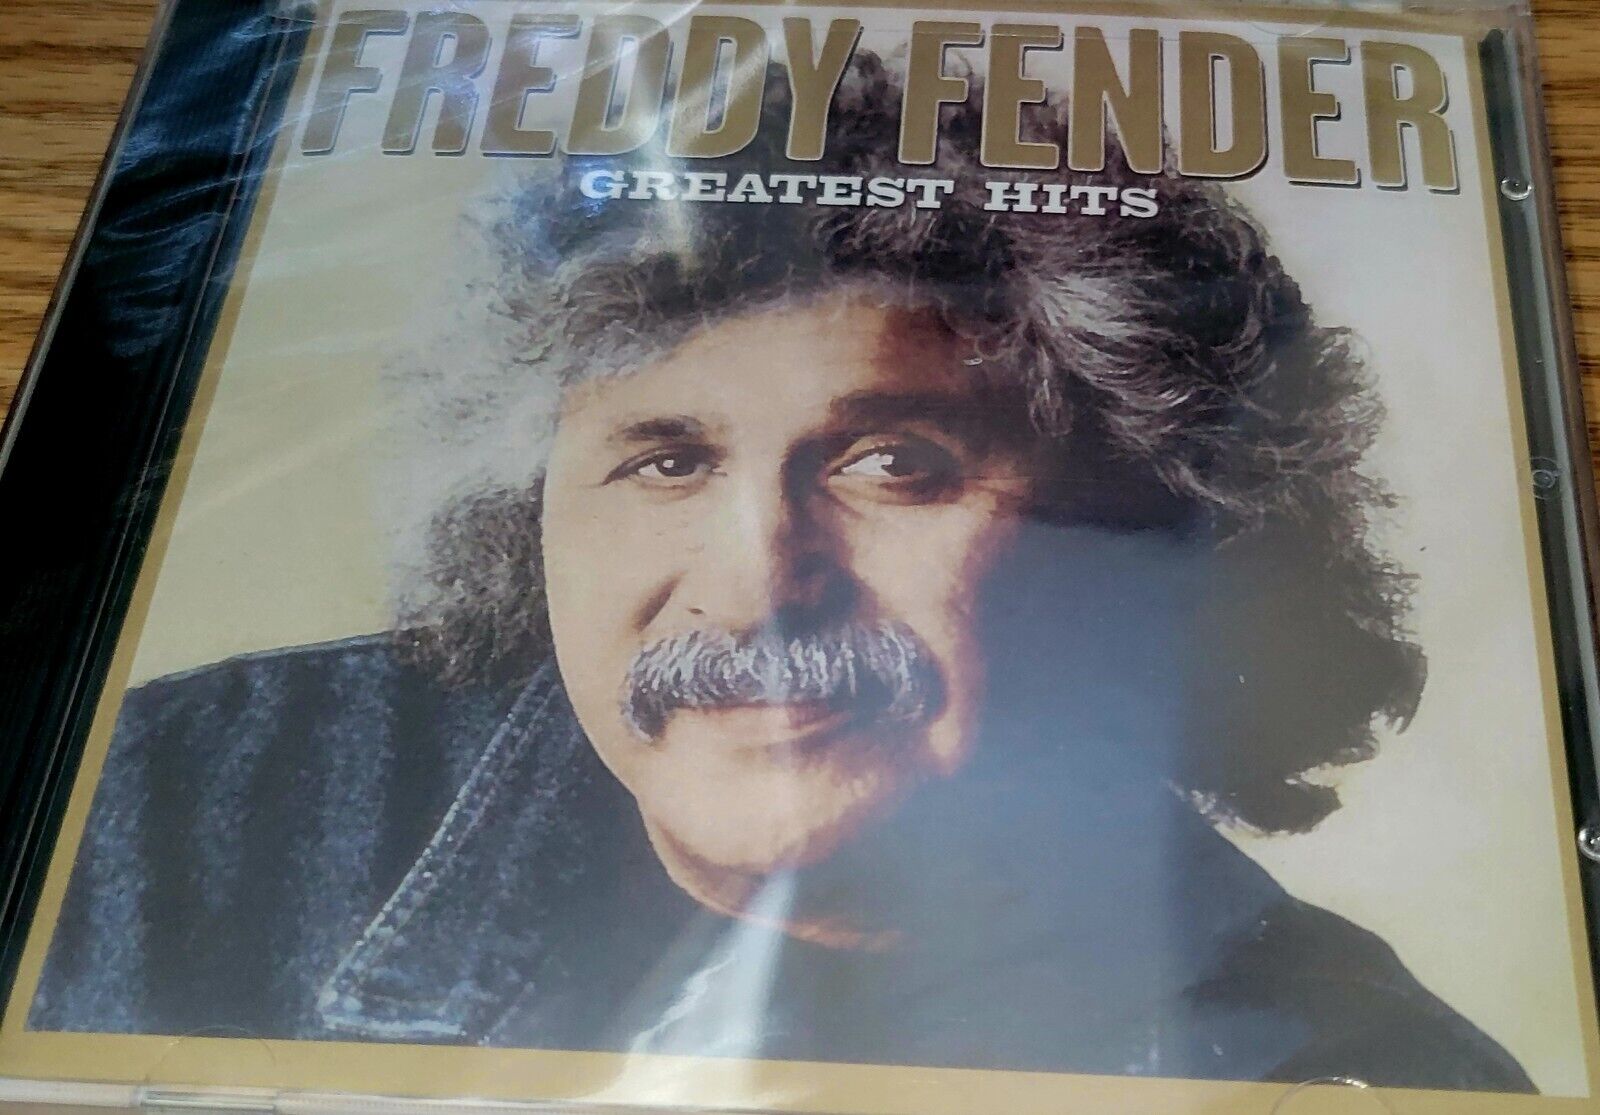 Greatest Hits by Freddy Fender CD, 2 Discs super rare BEST OF out of print